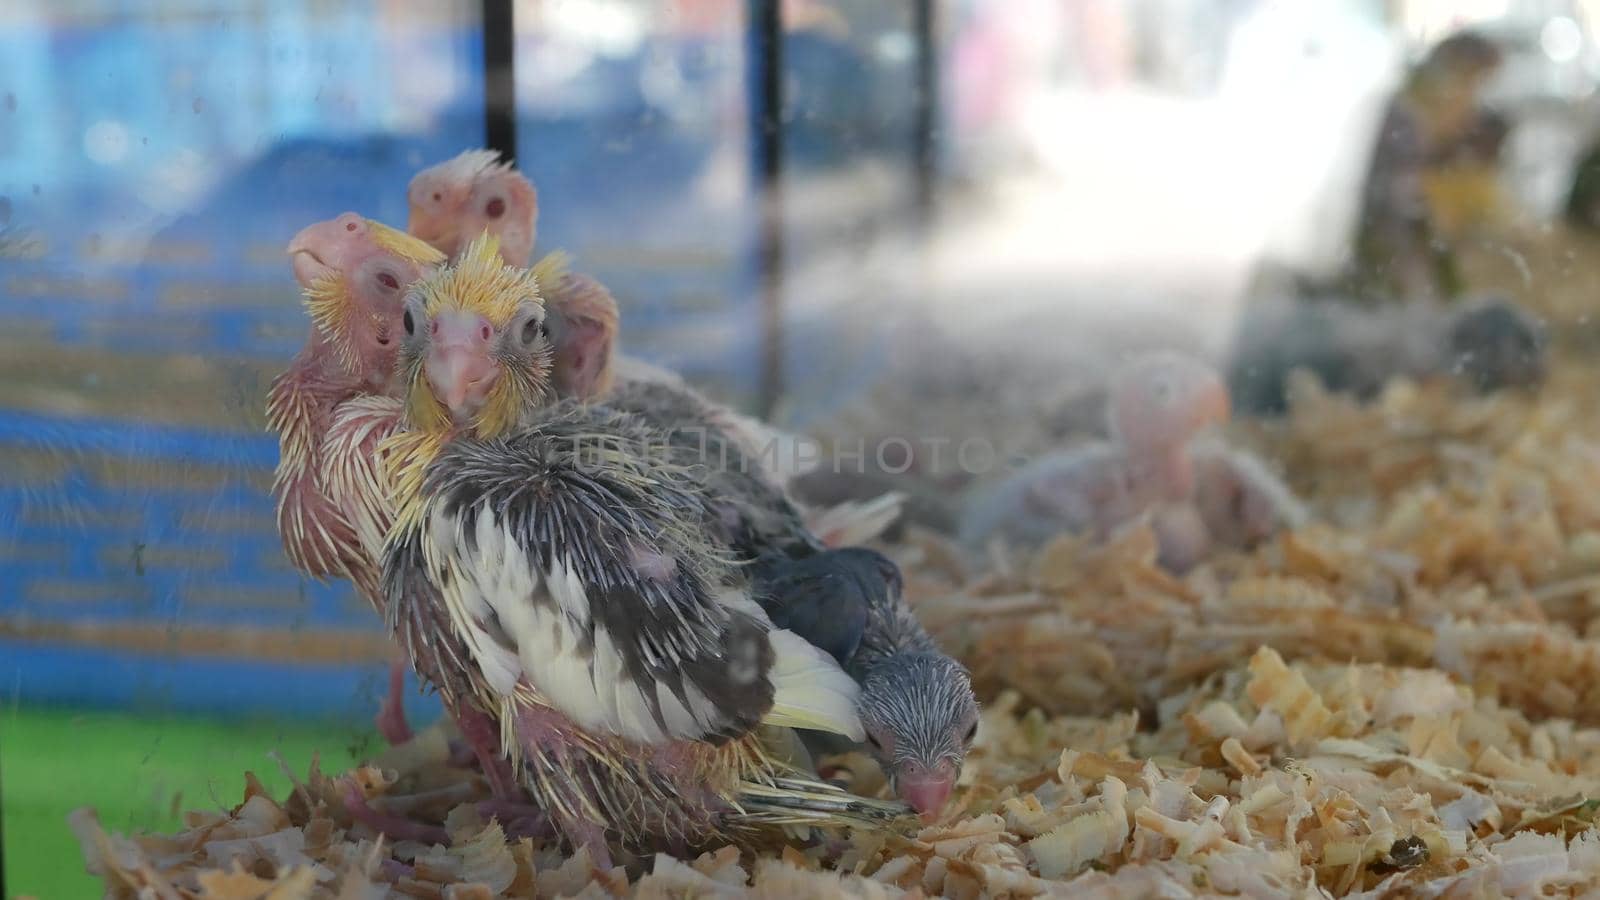 Parrot chicks in cages on pet market. From above birds being kept in small cage on Chatuchak Market in Bangkok, Thailand.